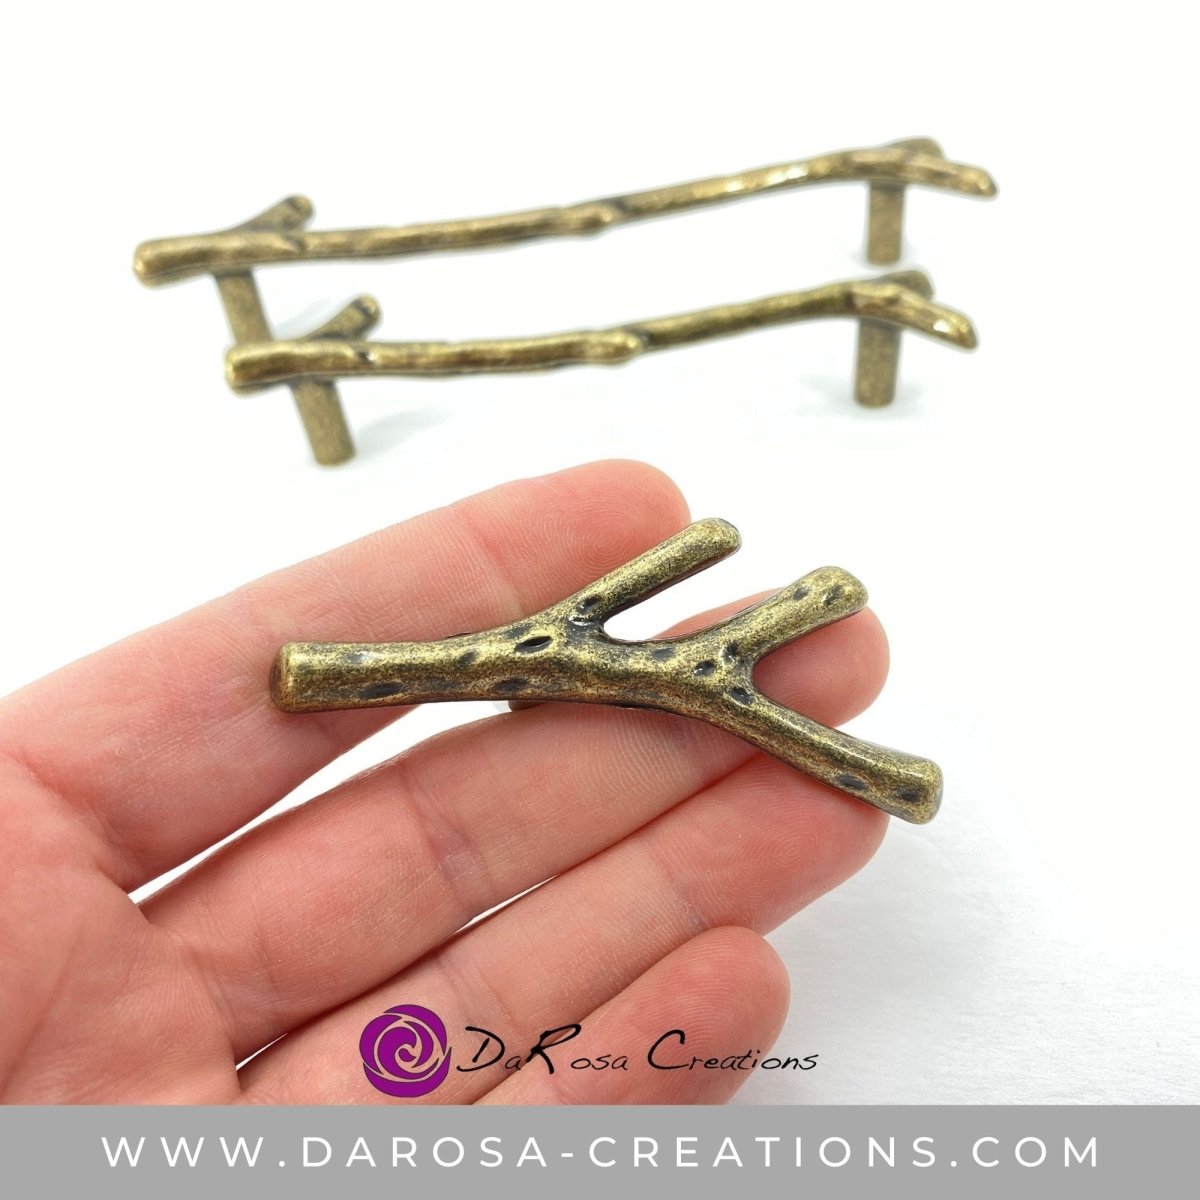 Branch Drawer Knobs and Pulls in Brass - DaRosa Creations